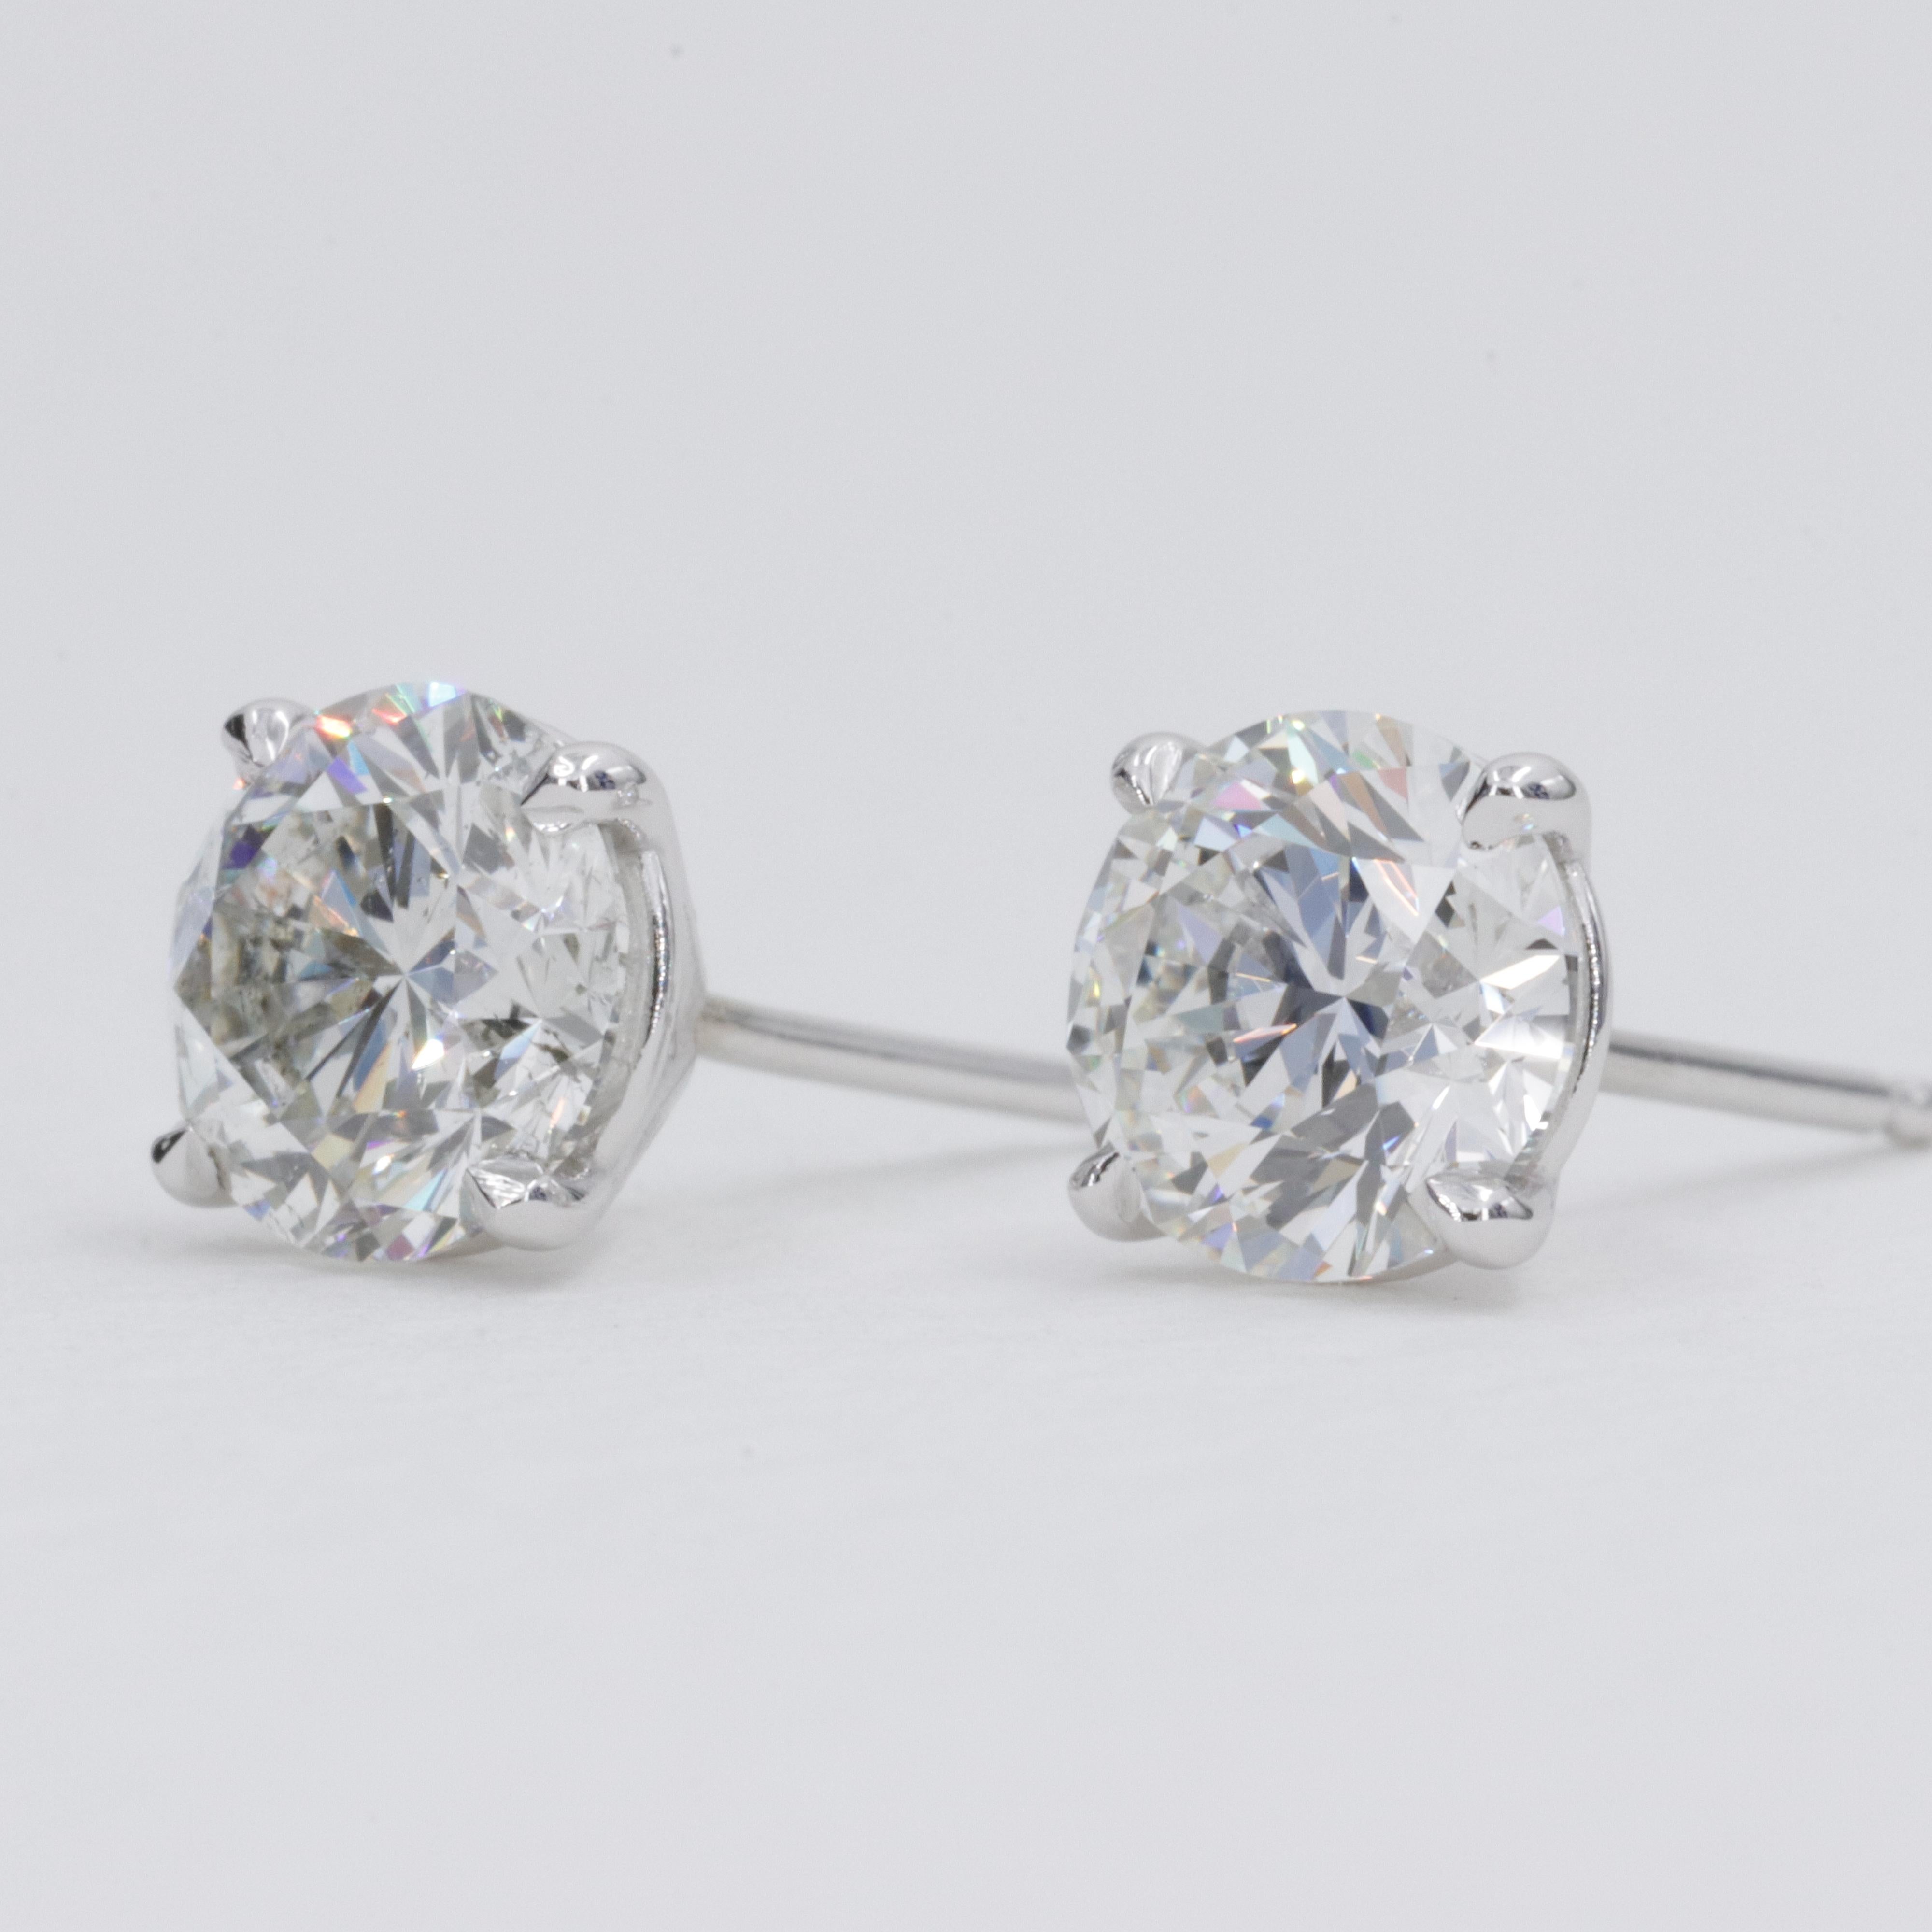 Round Cut 2.06 Carat GIA Natural Diamond Stud Earrings in White Gold 4 Prong Settings For Sale